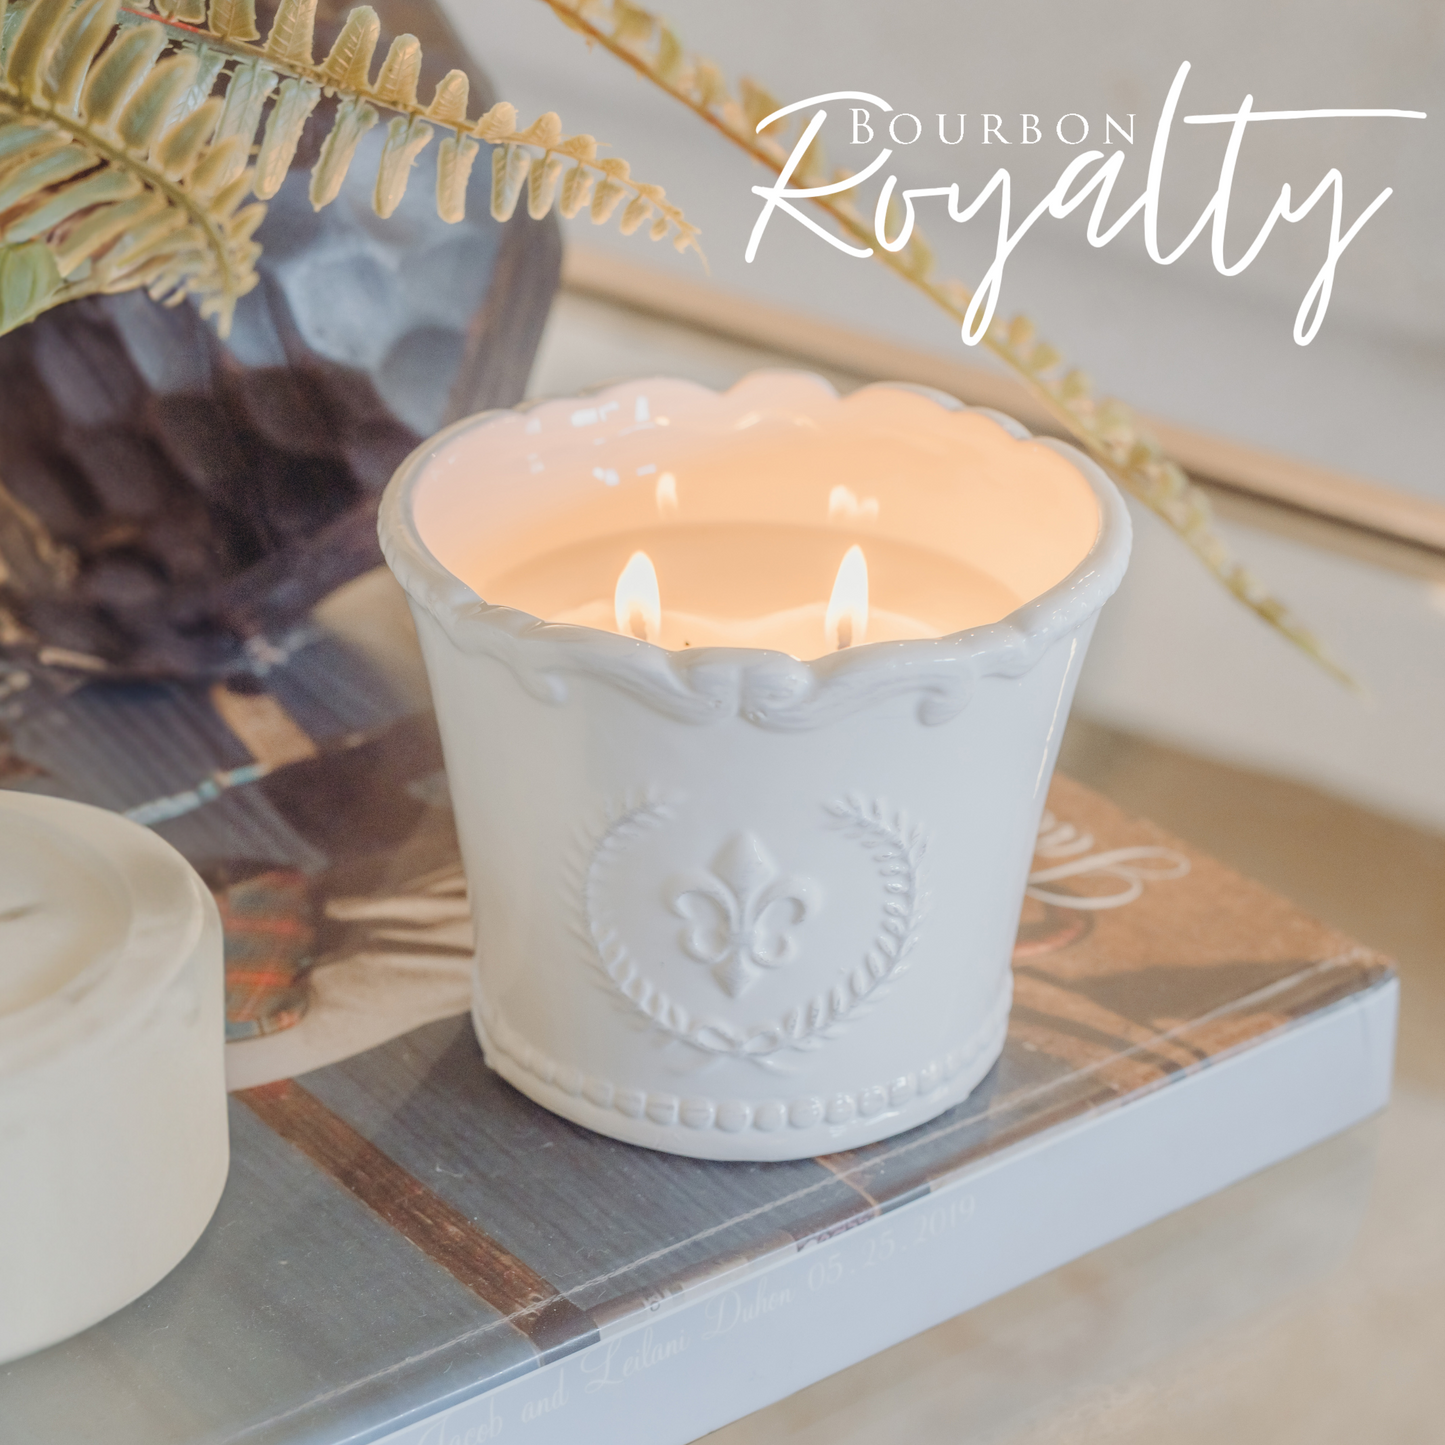 Bourbon Royalty Marquis Candle 10oz